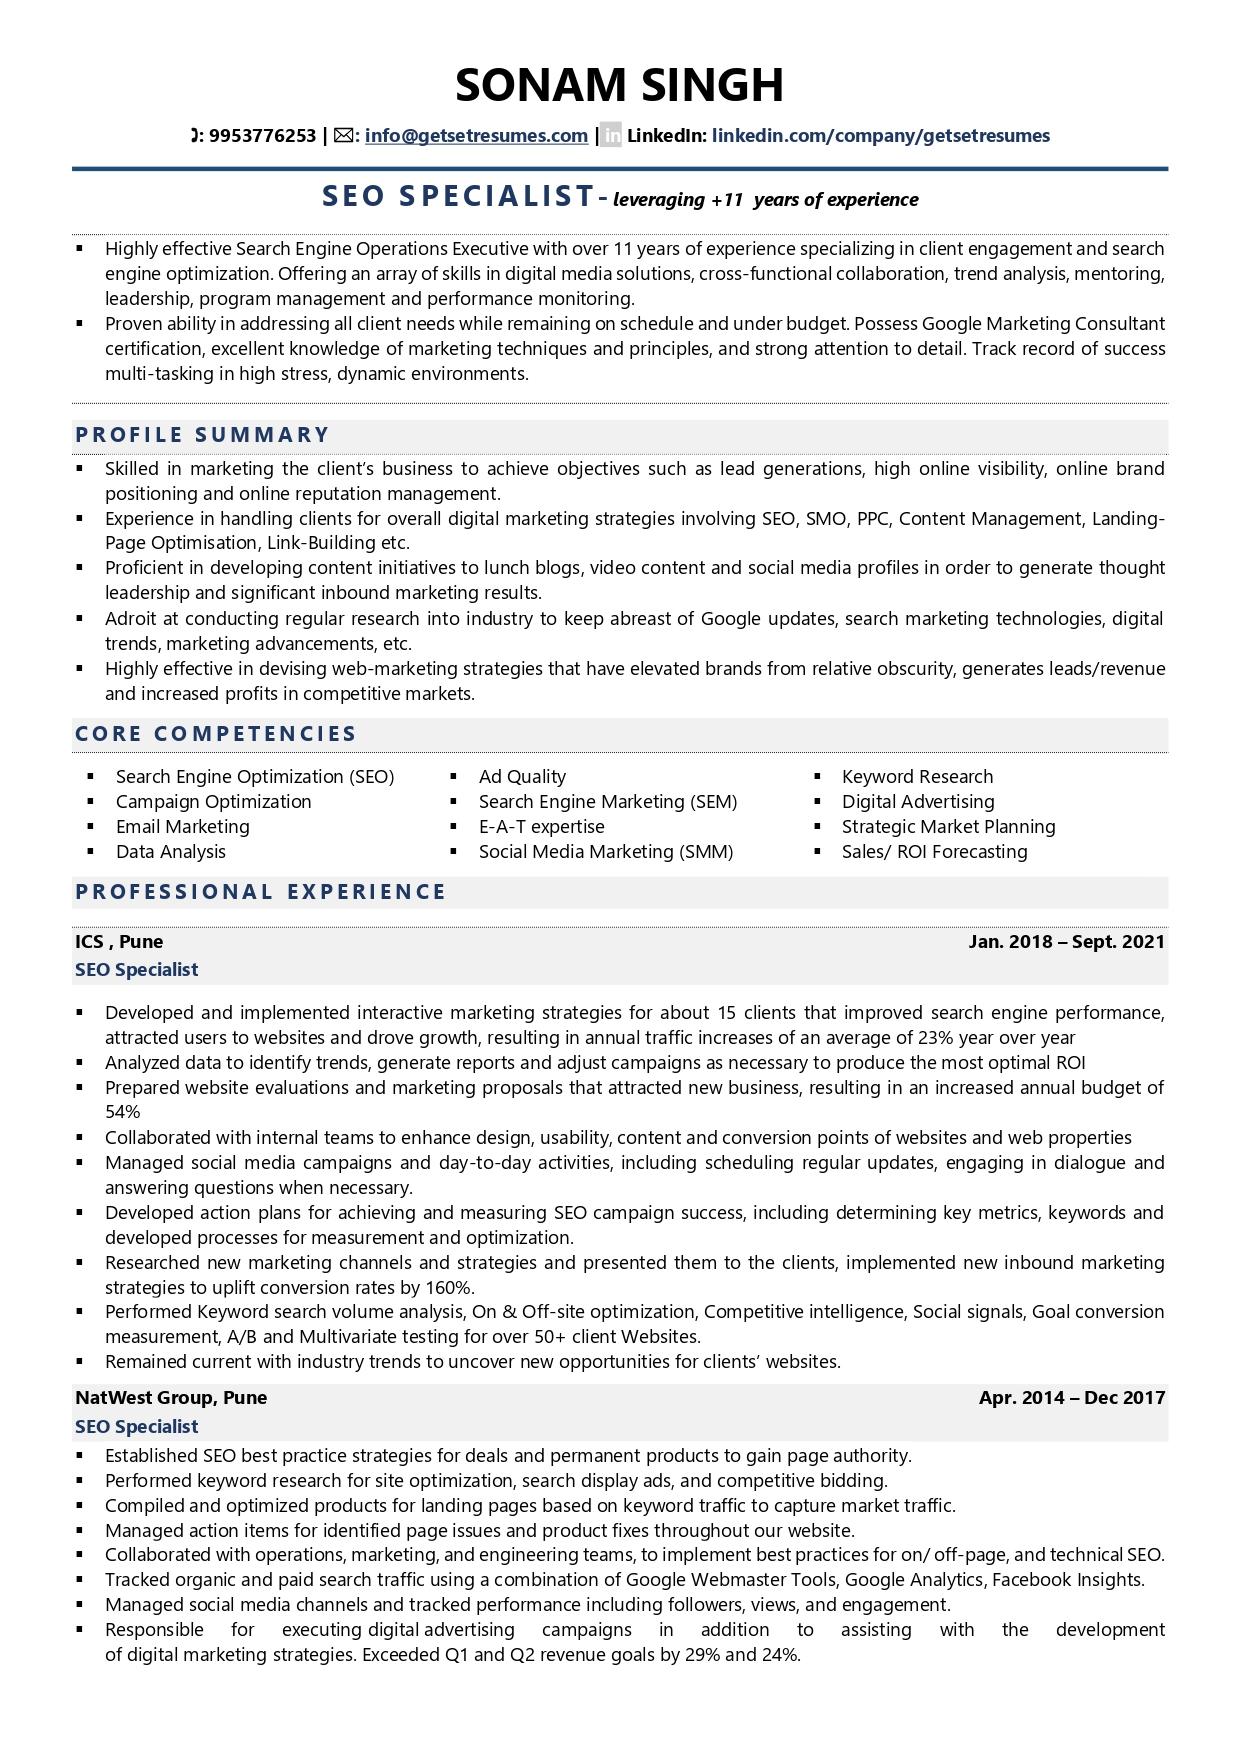 SEO Specialist - Resume Example & Template